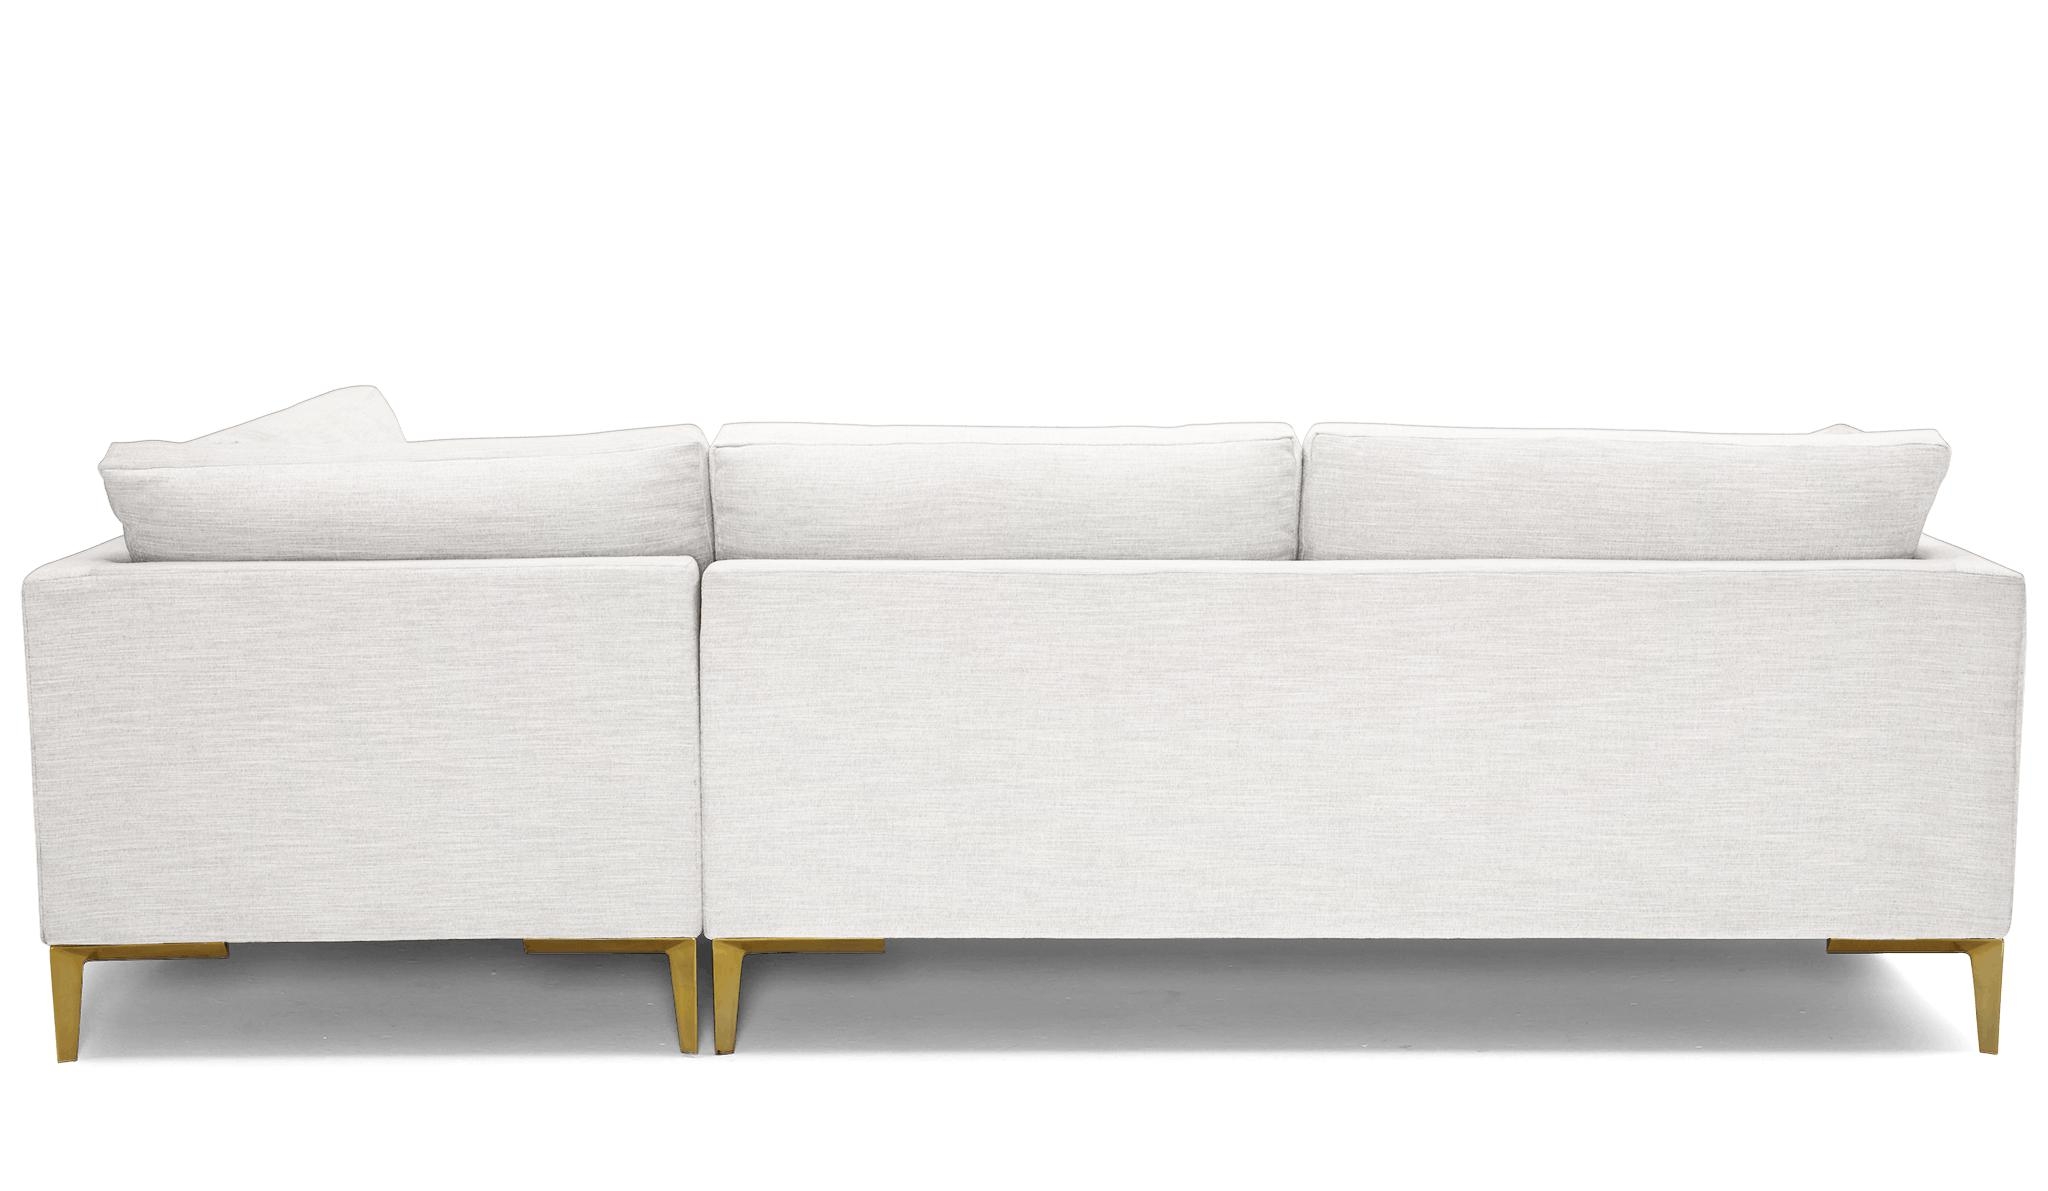 White Ainsley Mid Century Modern Sectional with Bumper - Tussah Blizzard - Left - Image 4